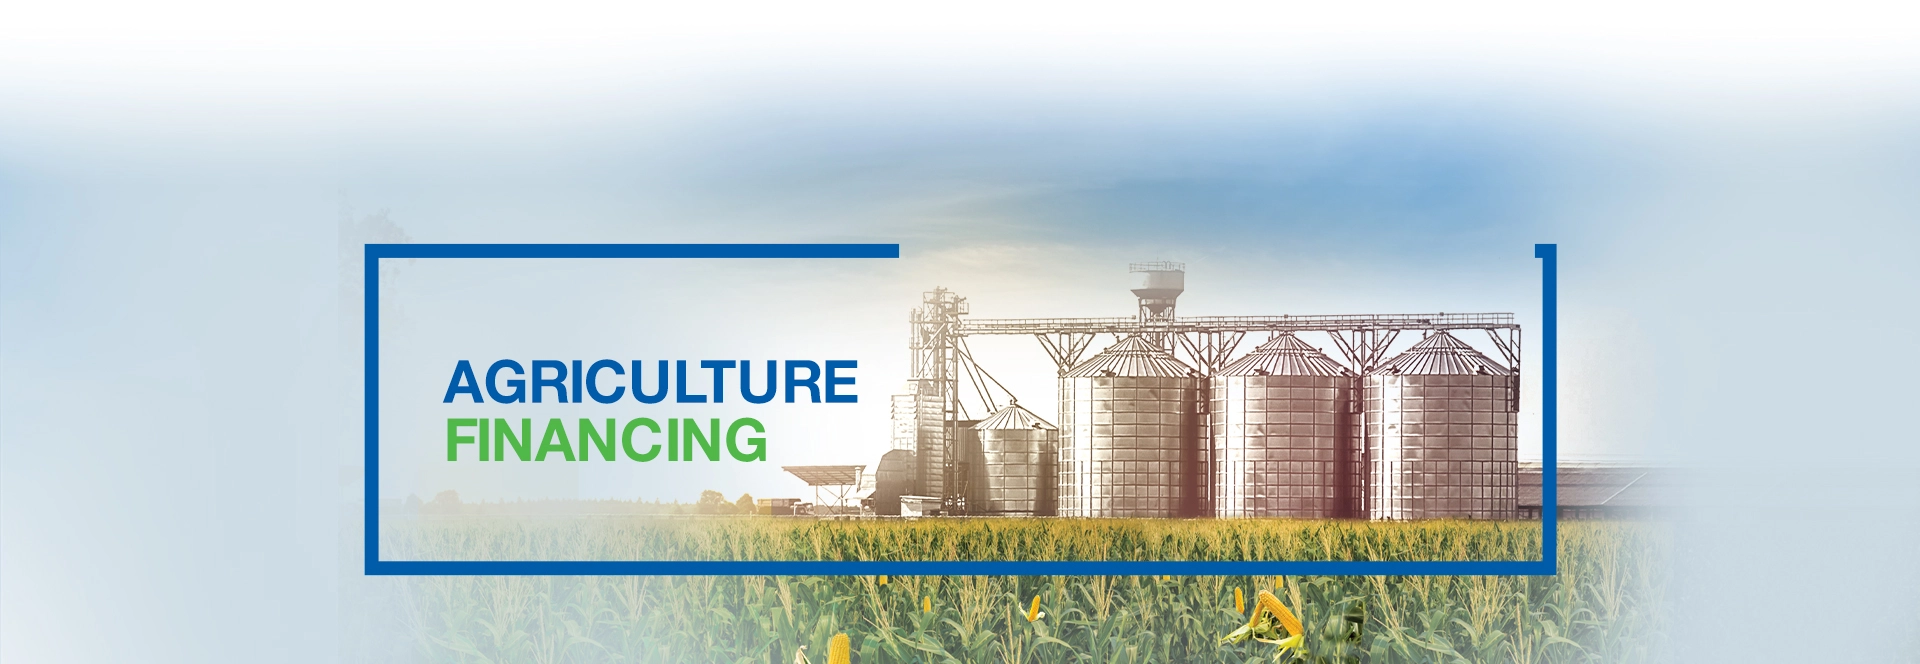 agriculture financing